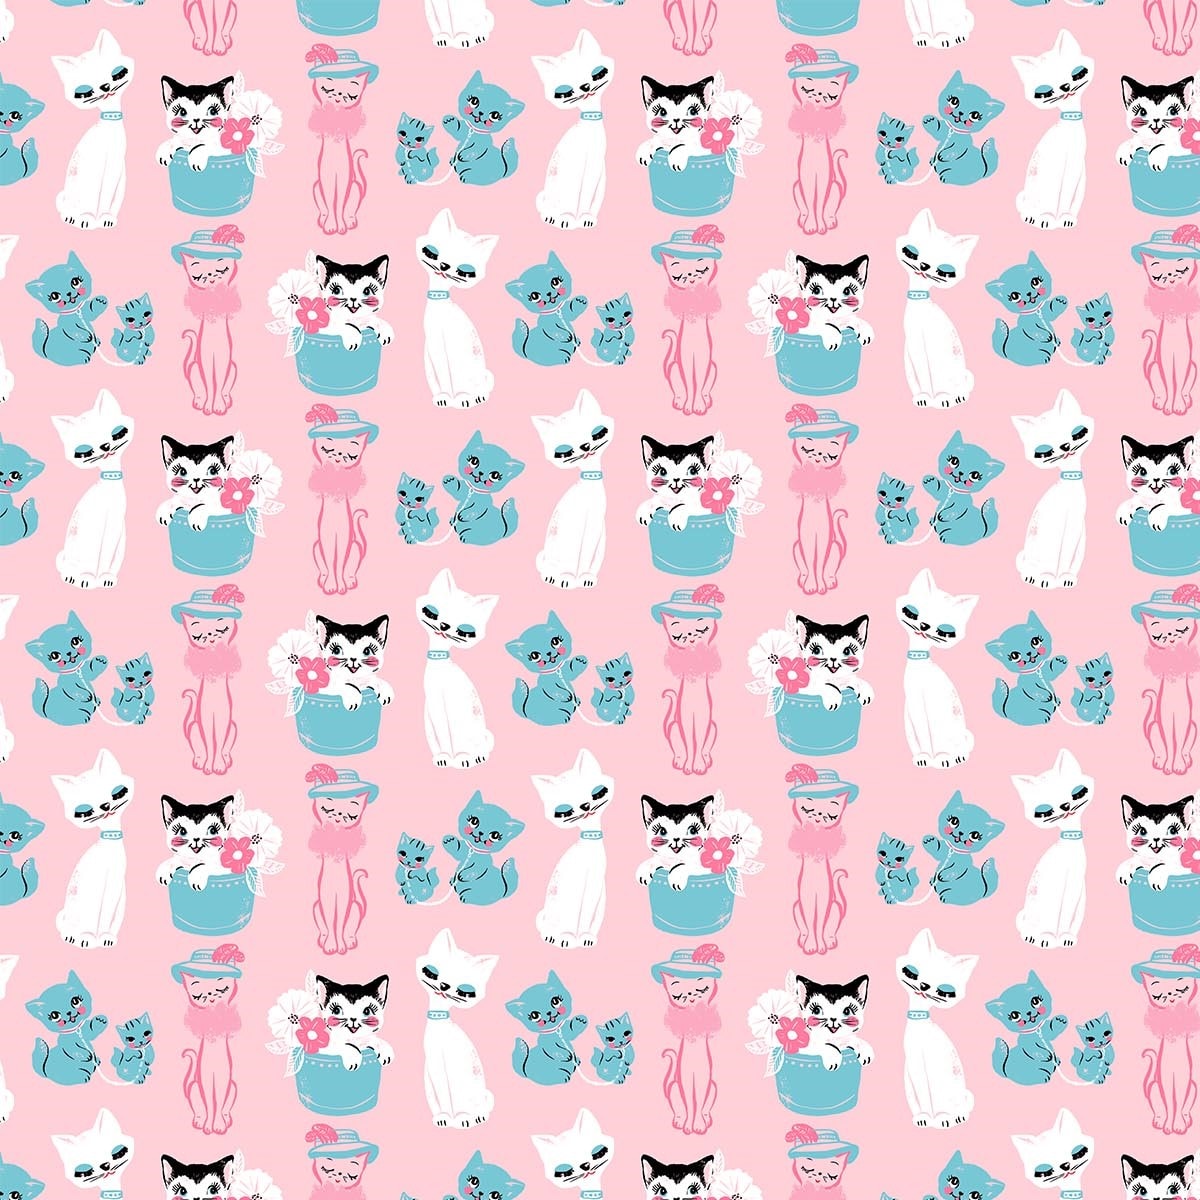 Vintage Cats - Pink